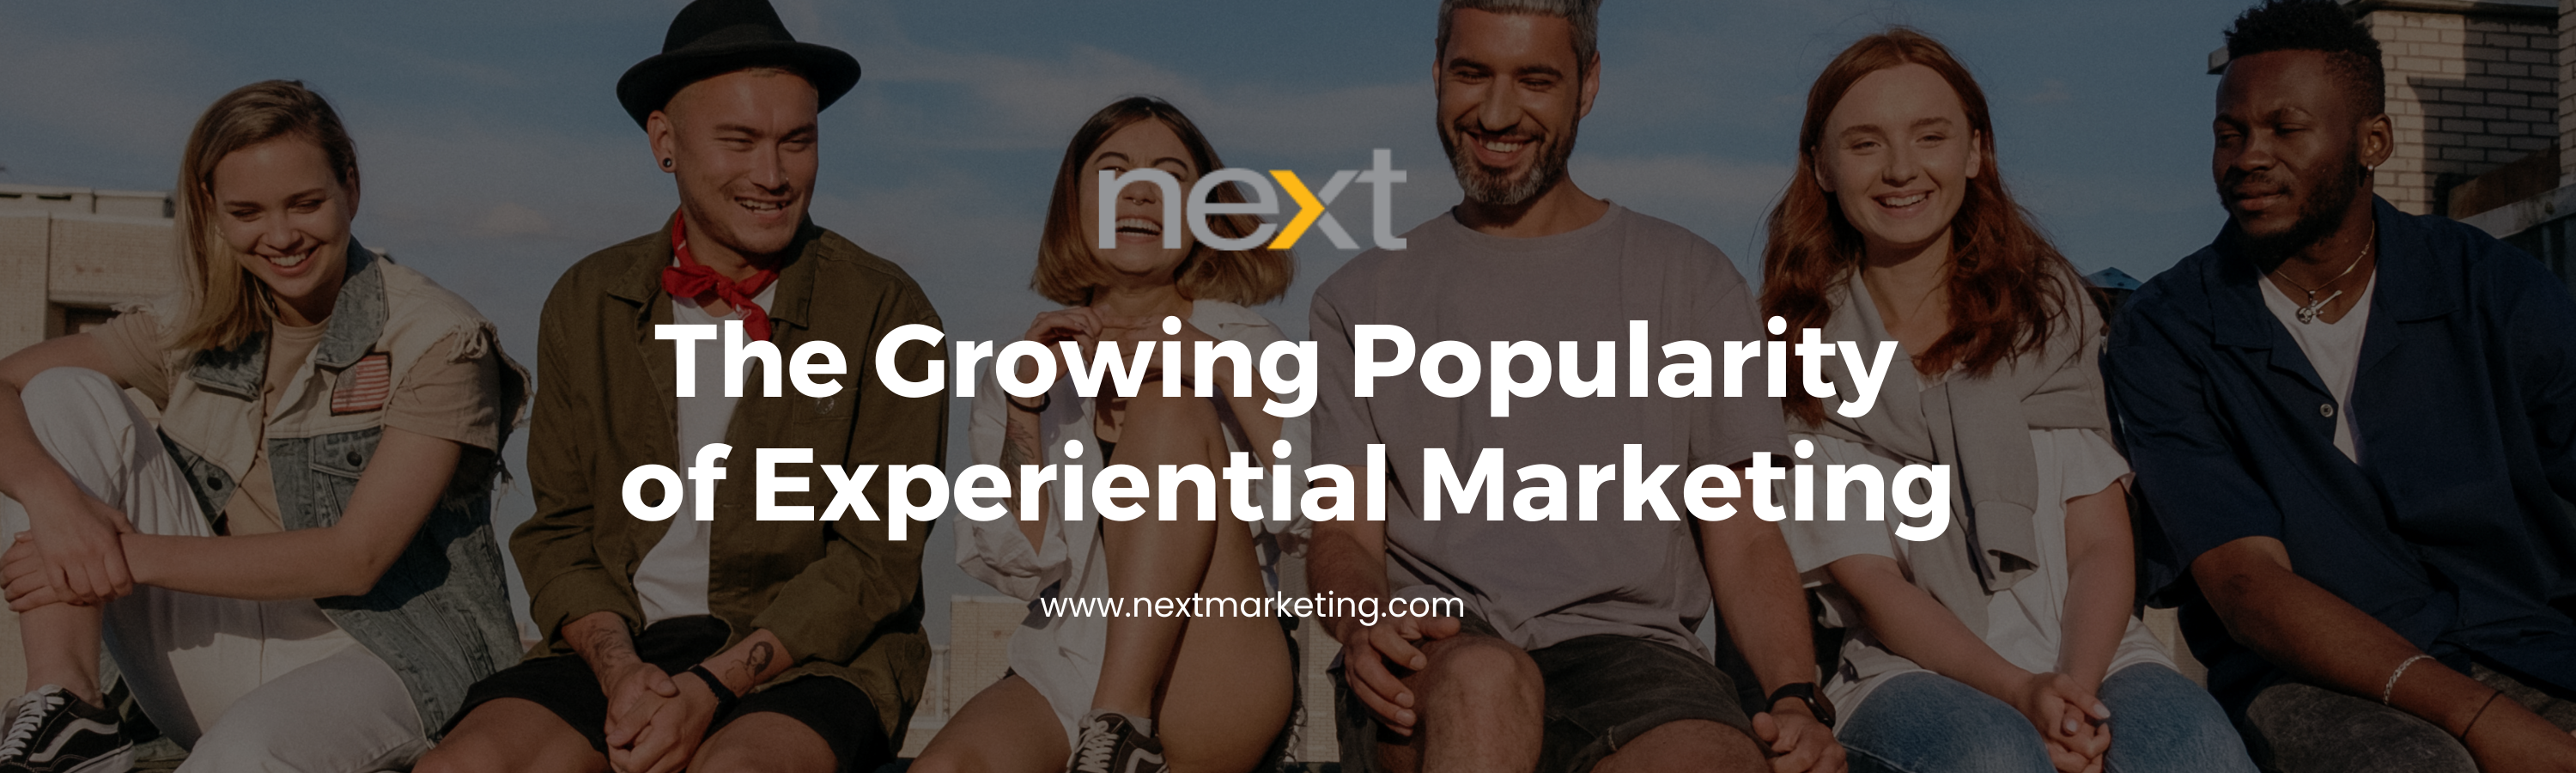 The Growing Popularity of Experiential Marketing